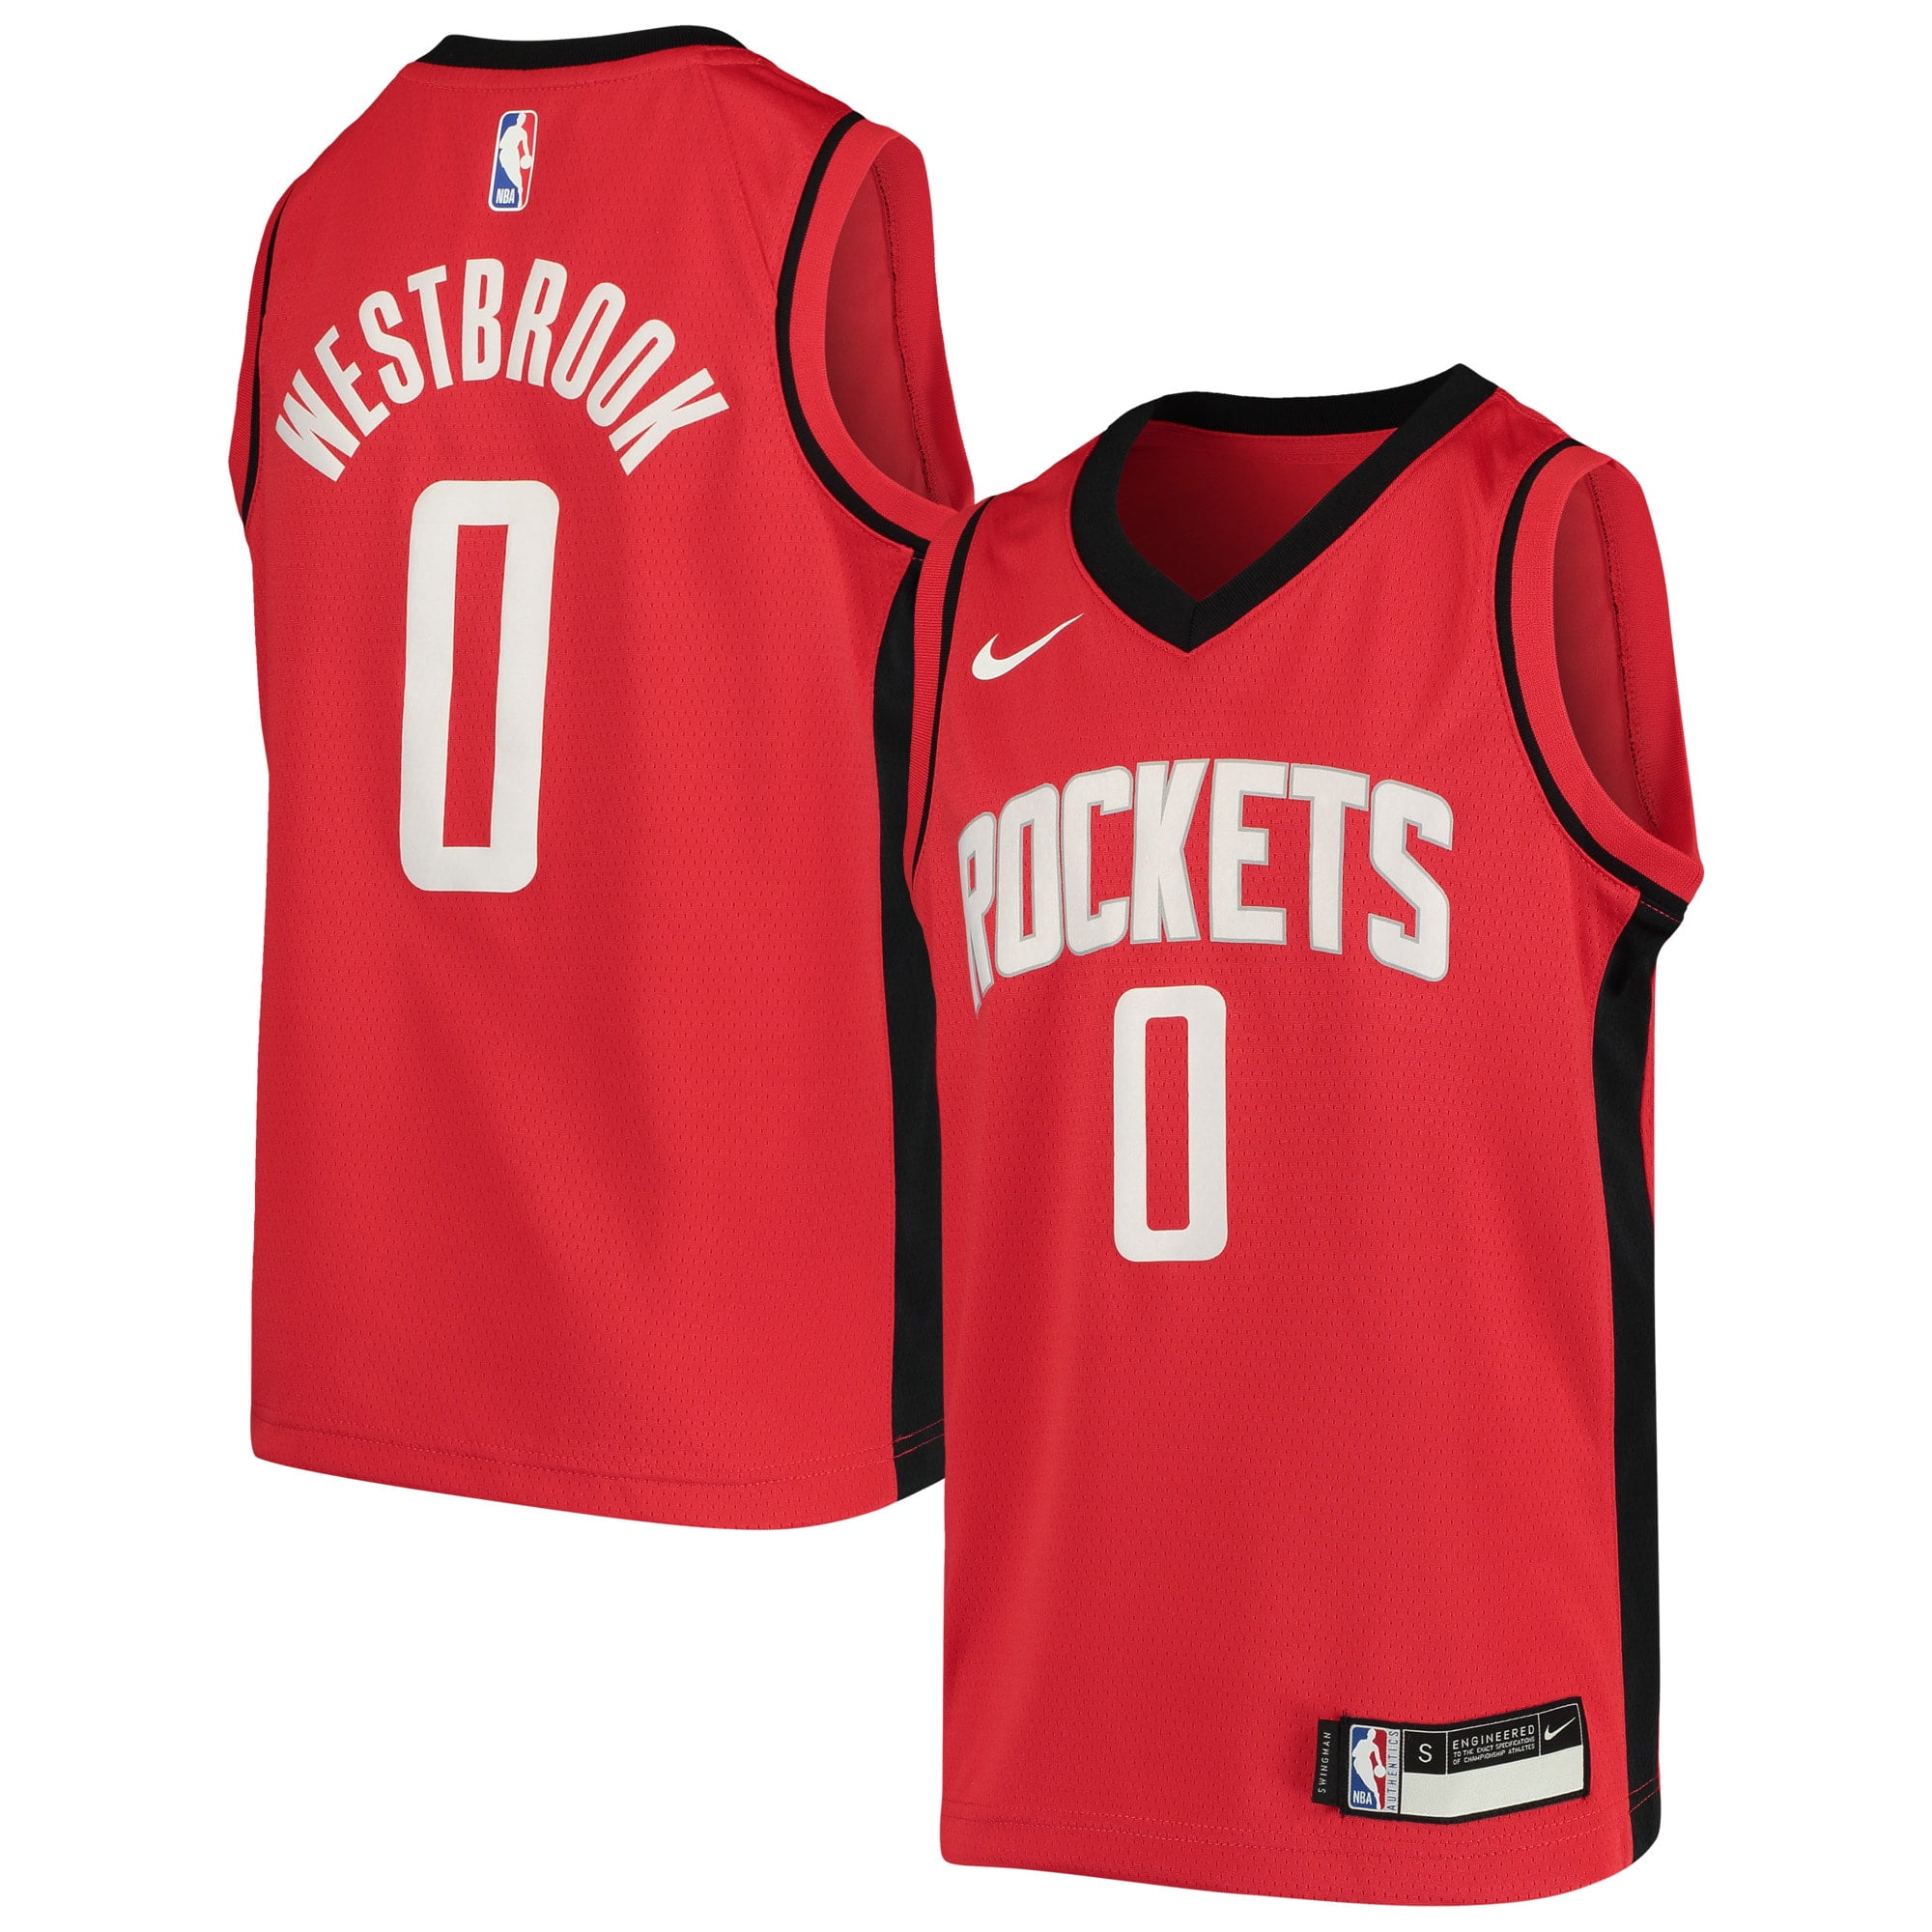 Russell Westbrook Nike Houston Rockets H-Town City Edition $110